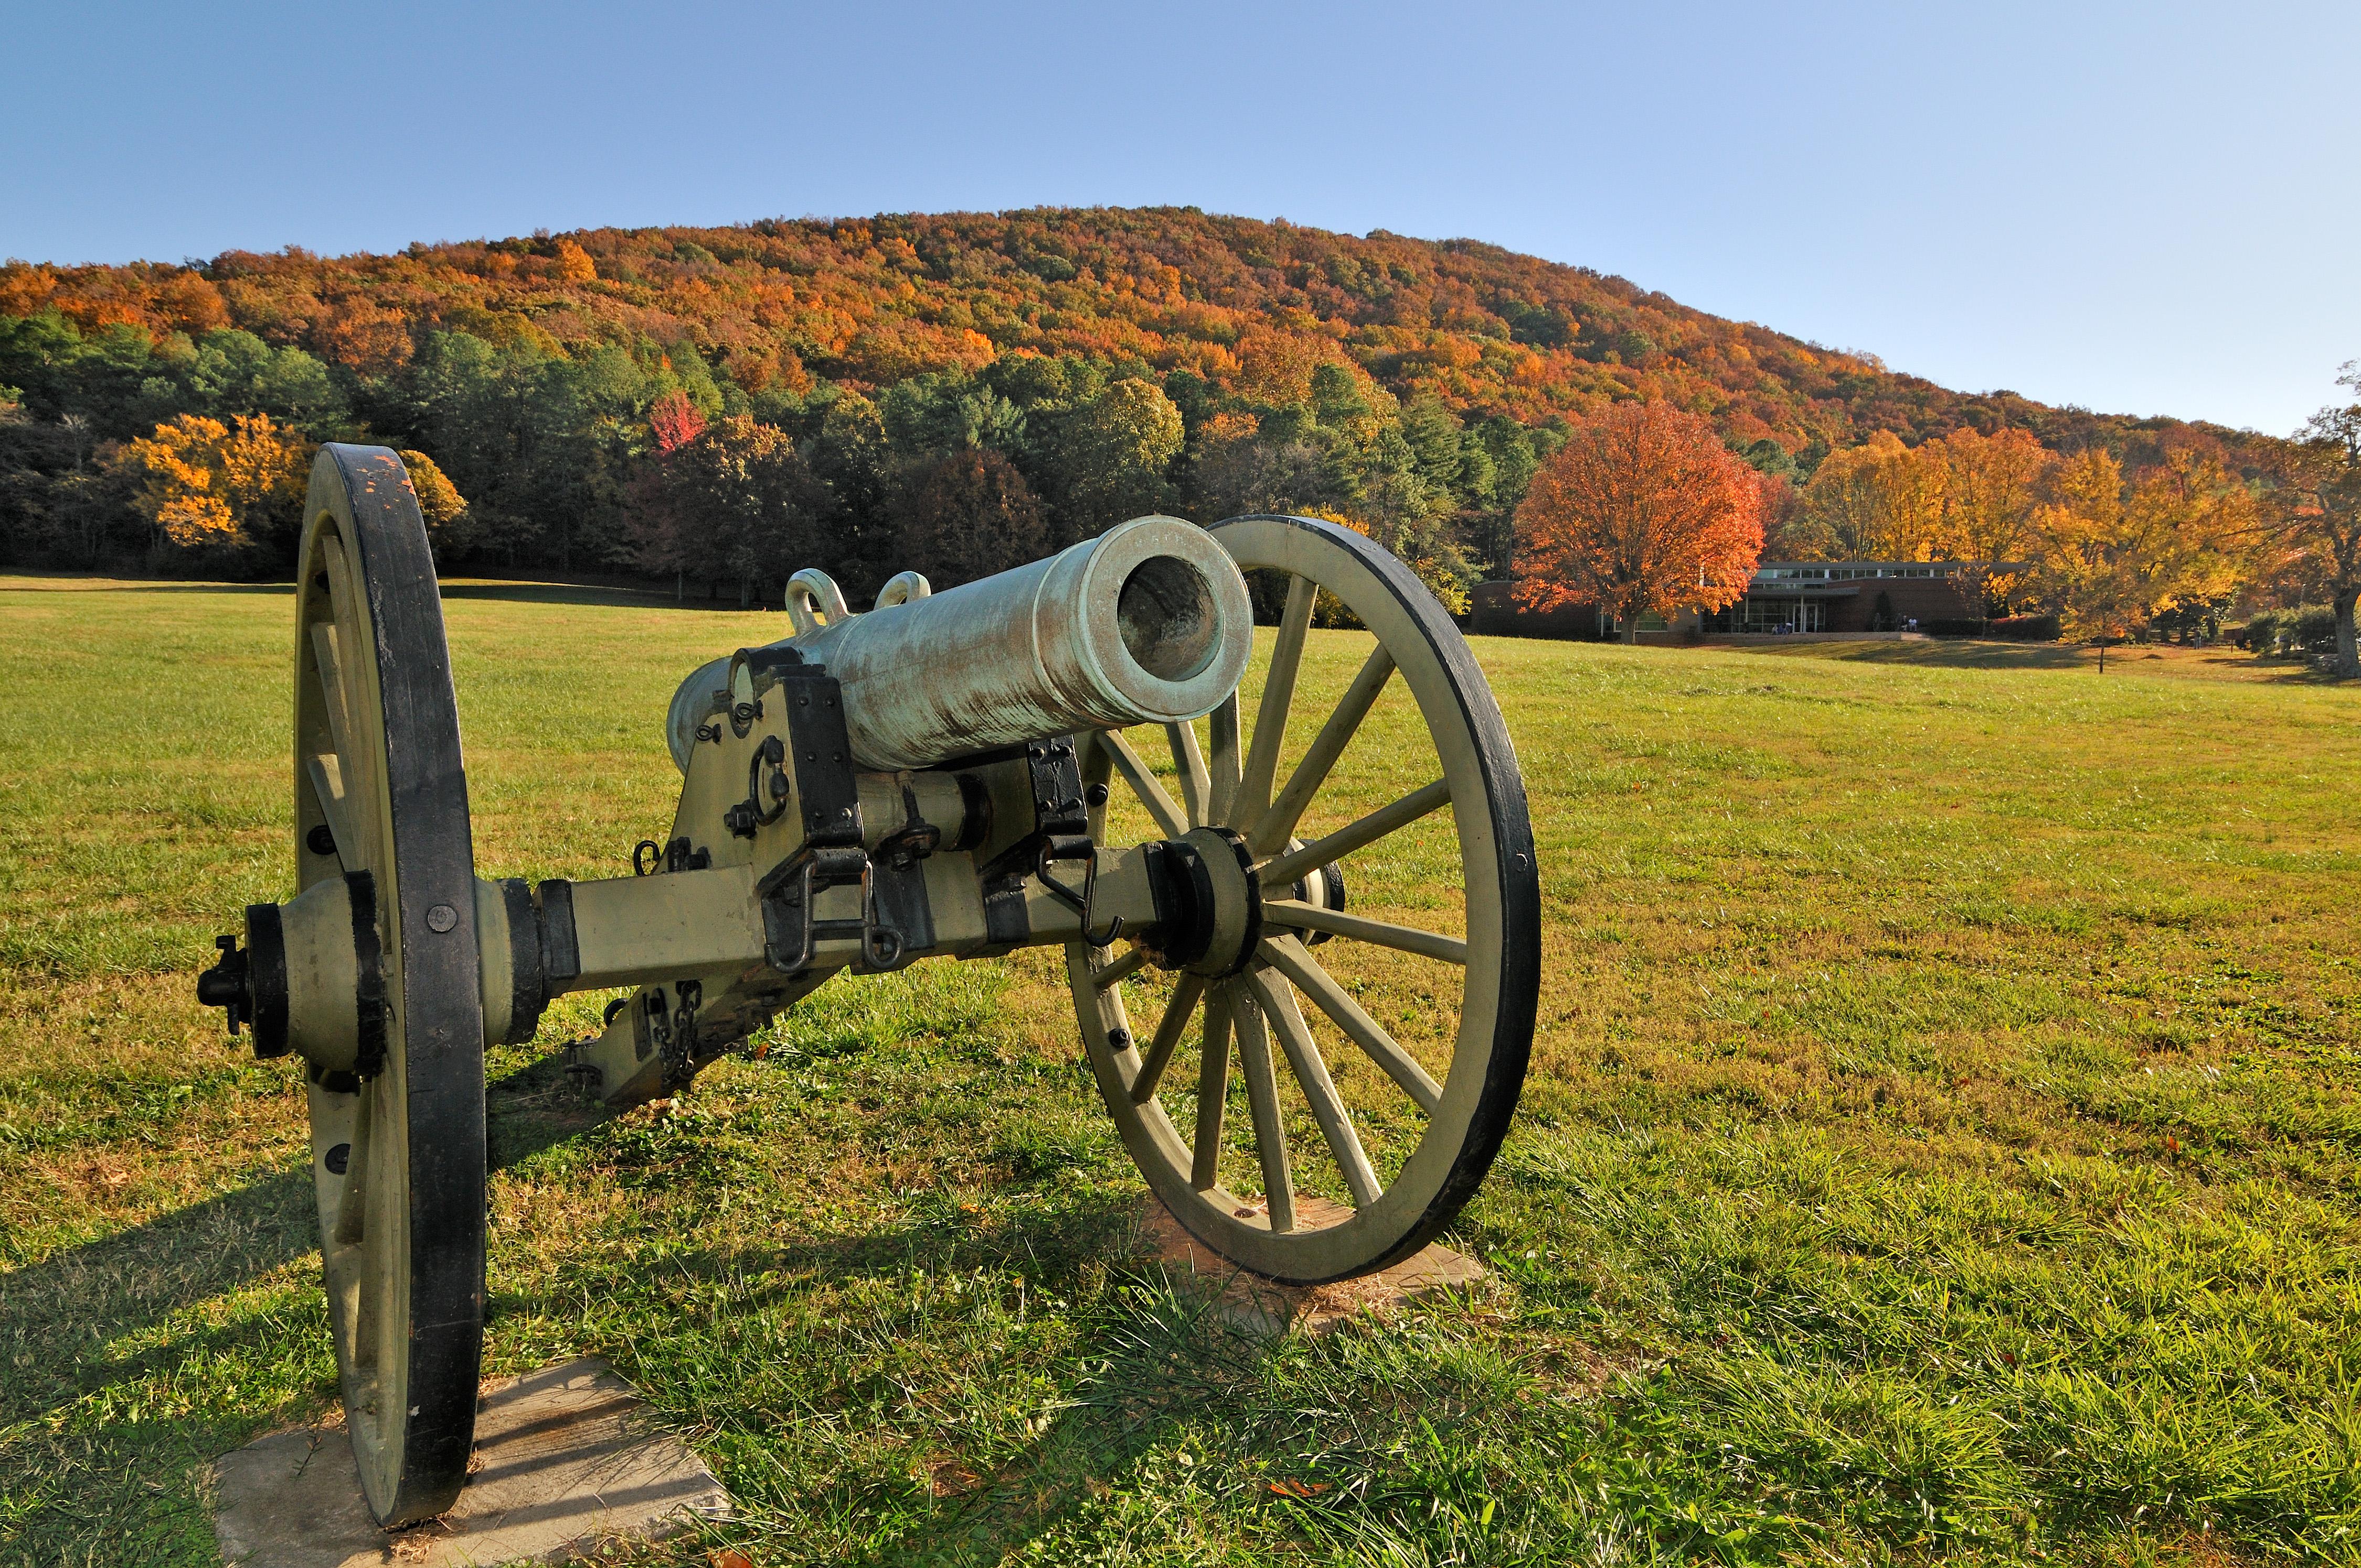 Cannon with front field and Visitor Center in background.